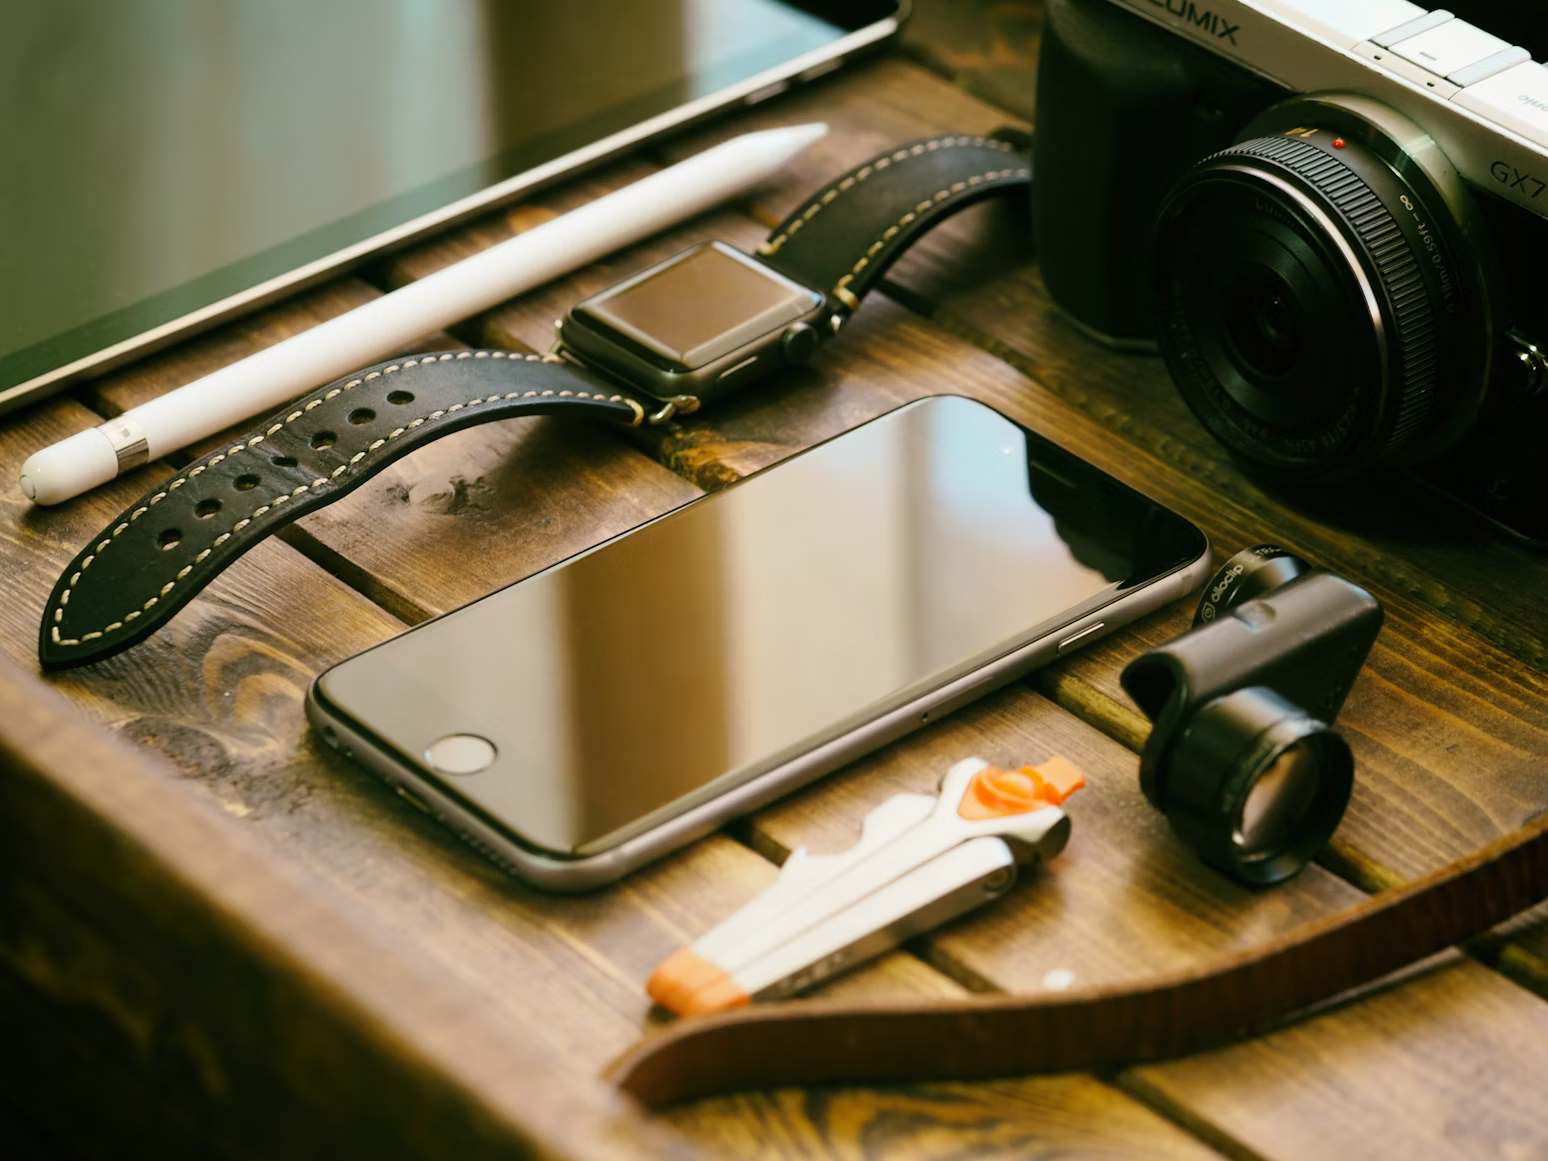 Phone, lens and camera on a wooden table